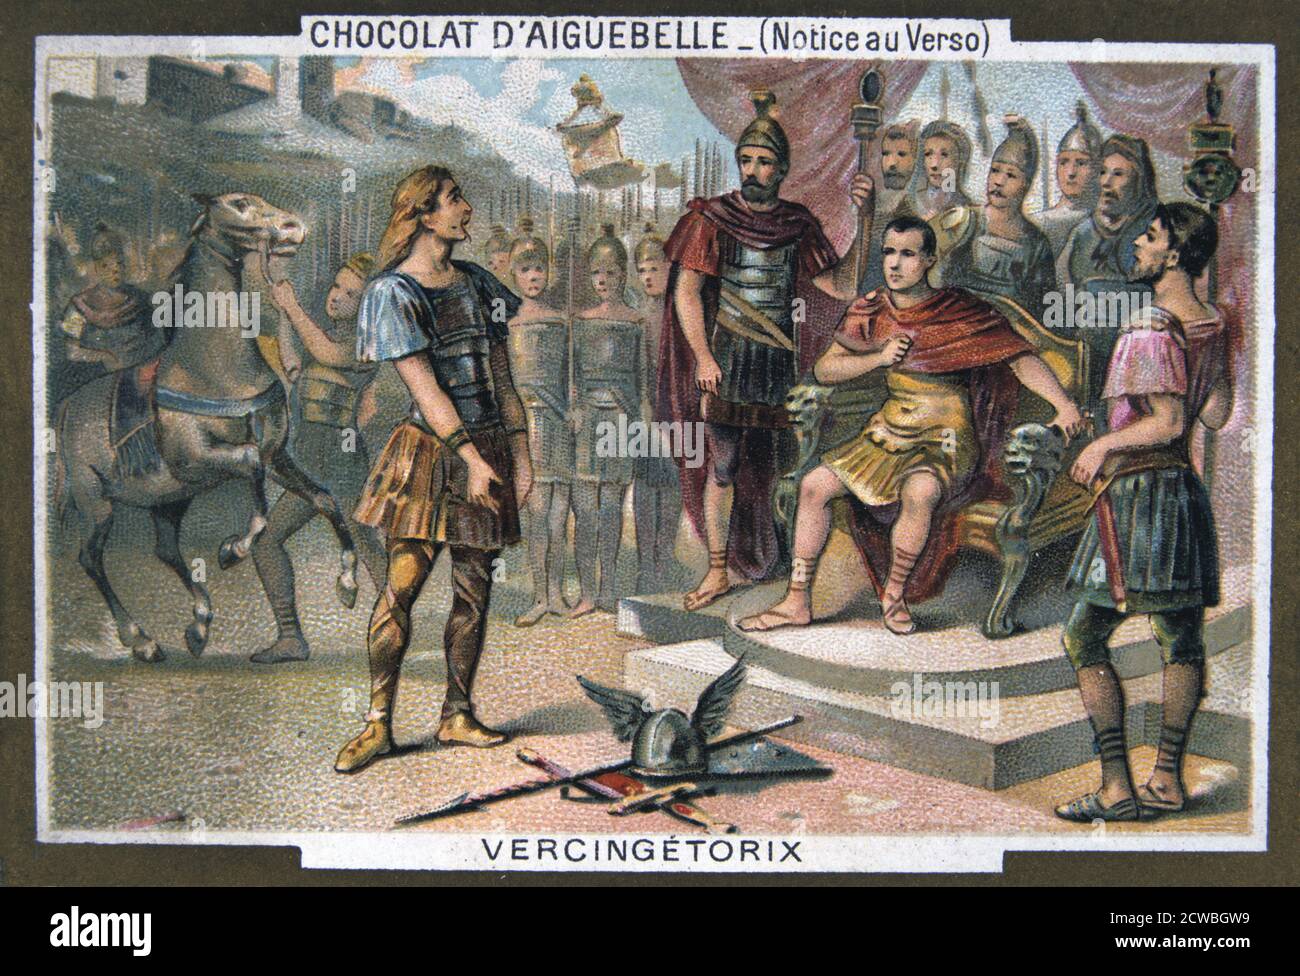 19th century Picture card, showing Vercingetorix surrendering to Julius Caesar, c 46 BC. The Gallic chieftain Vercingetorix (died 46 BC) and was defeated and captured by Julius Caesar (100-44 BC) at Alesia (near Dijon in France). Vercingetorix was taken to Rome, where he was humiliated by being paraded as evidence of Rome's greatness, and was then put to death. Stock Photo